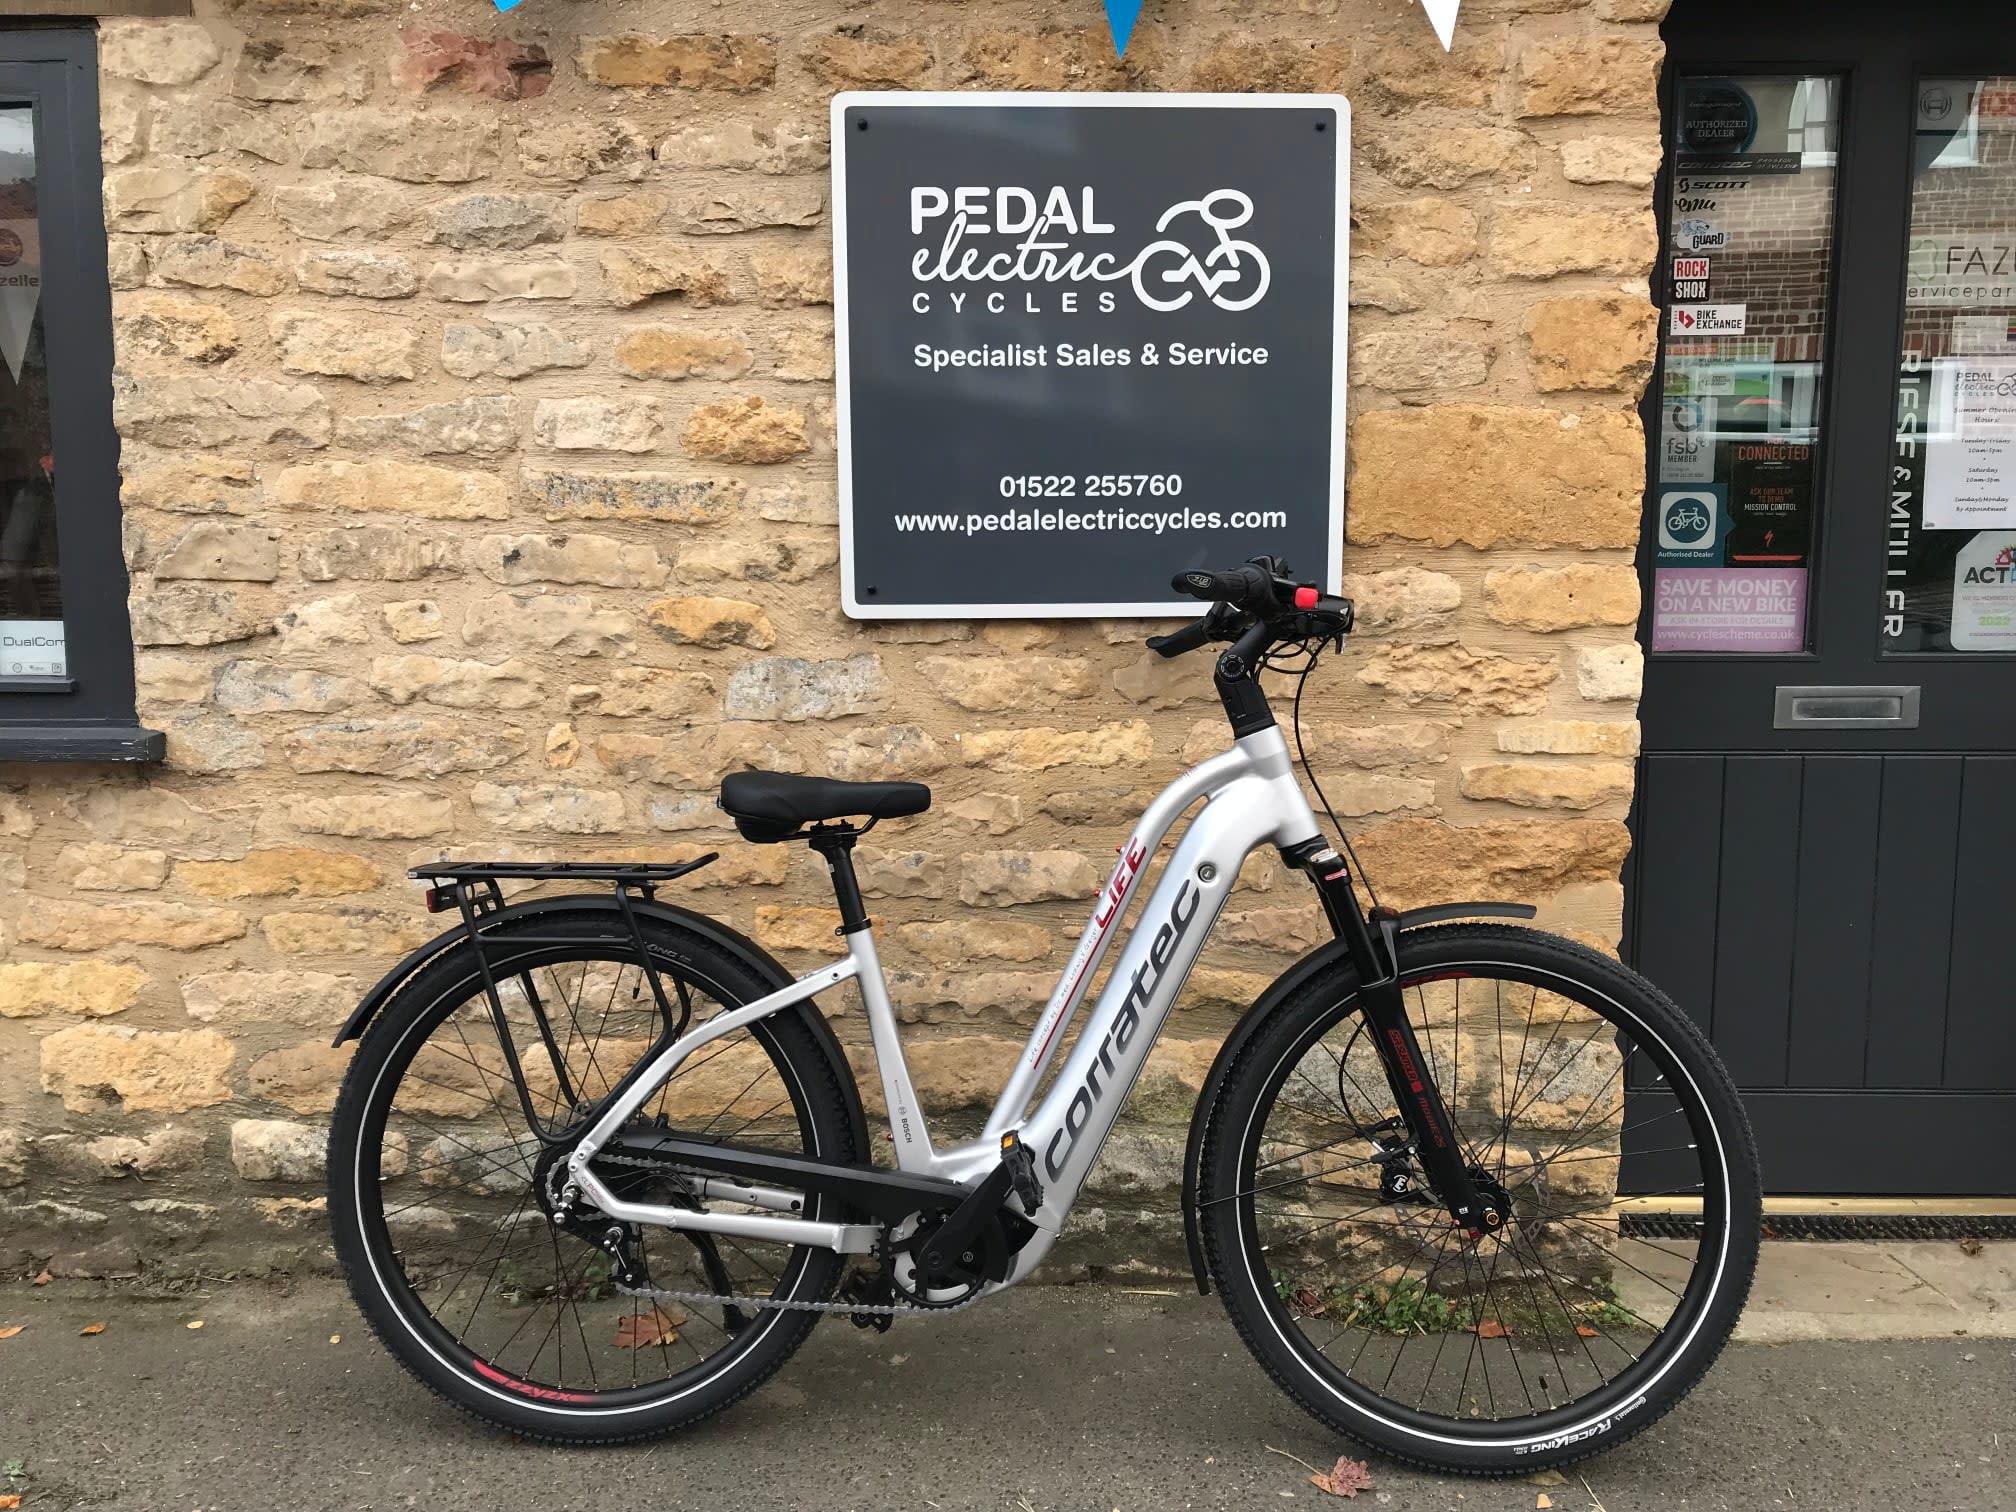 Images Pedal Electric Cycles